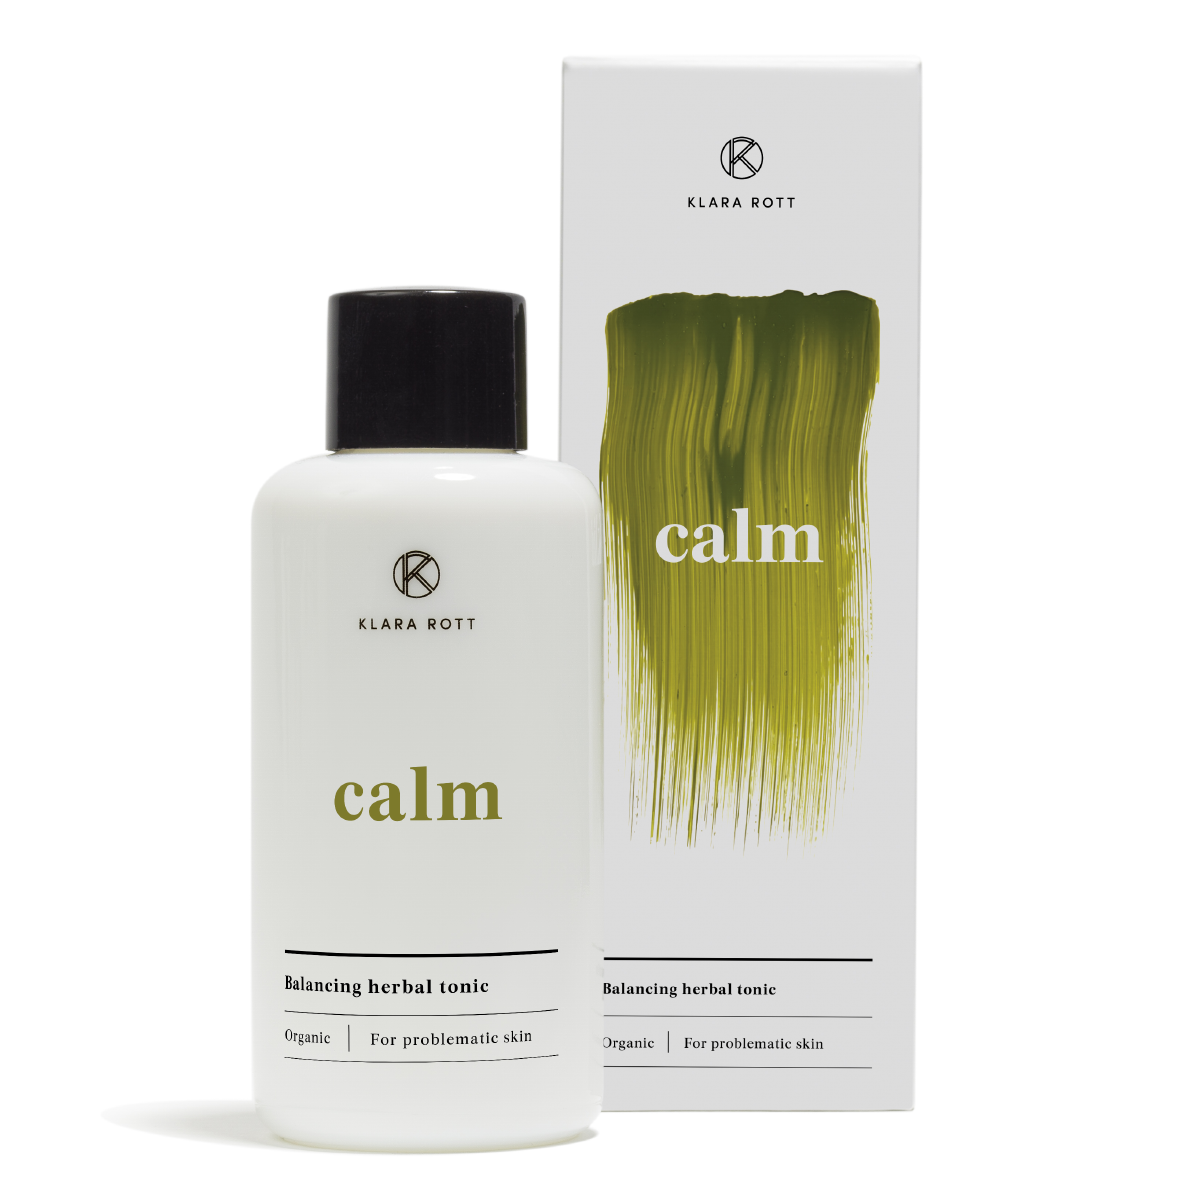 Calm - Balancing herbal tonic for problematic skin 